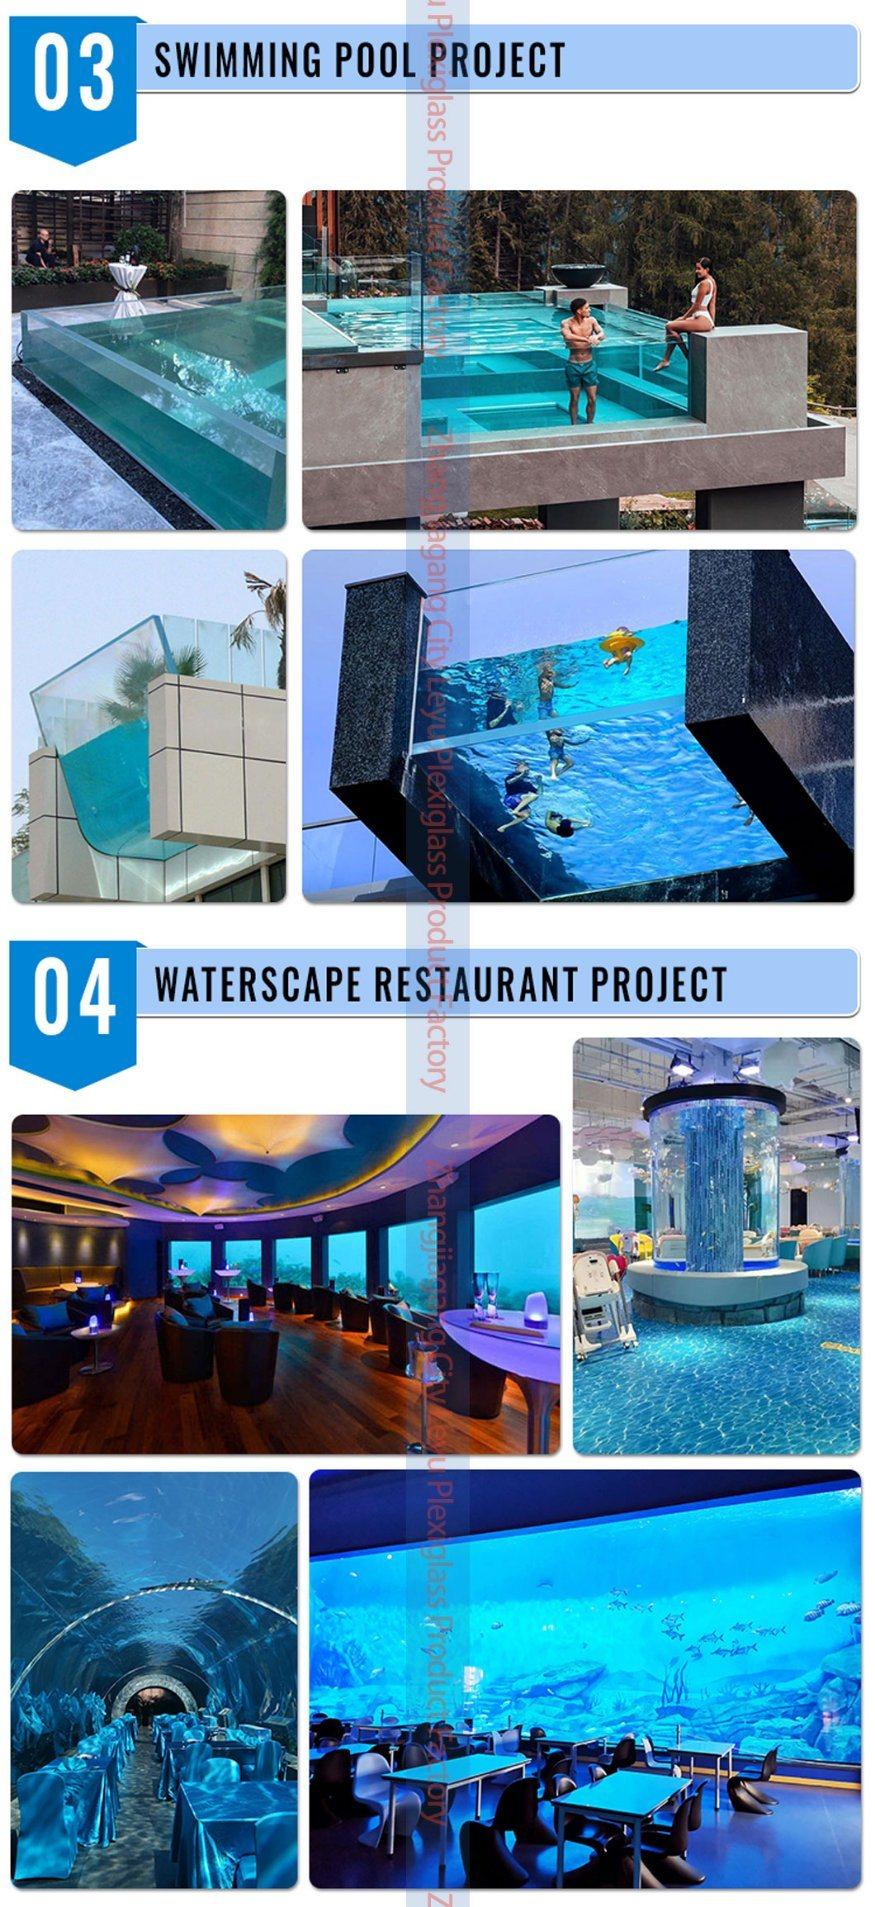 Aquarium Acrylic Panel Manufacturer 100% Lucite Raw Material Excellent Clear Acrylic Tunnel